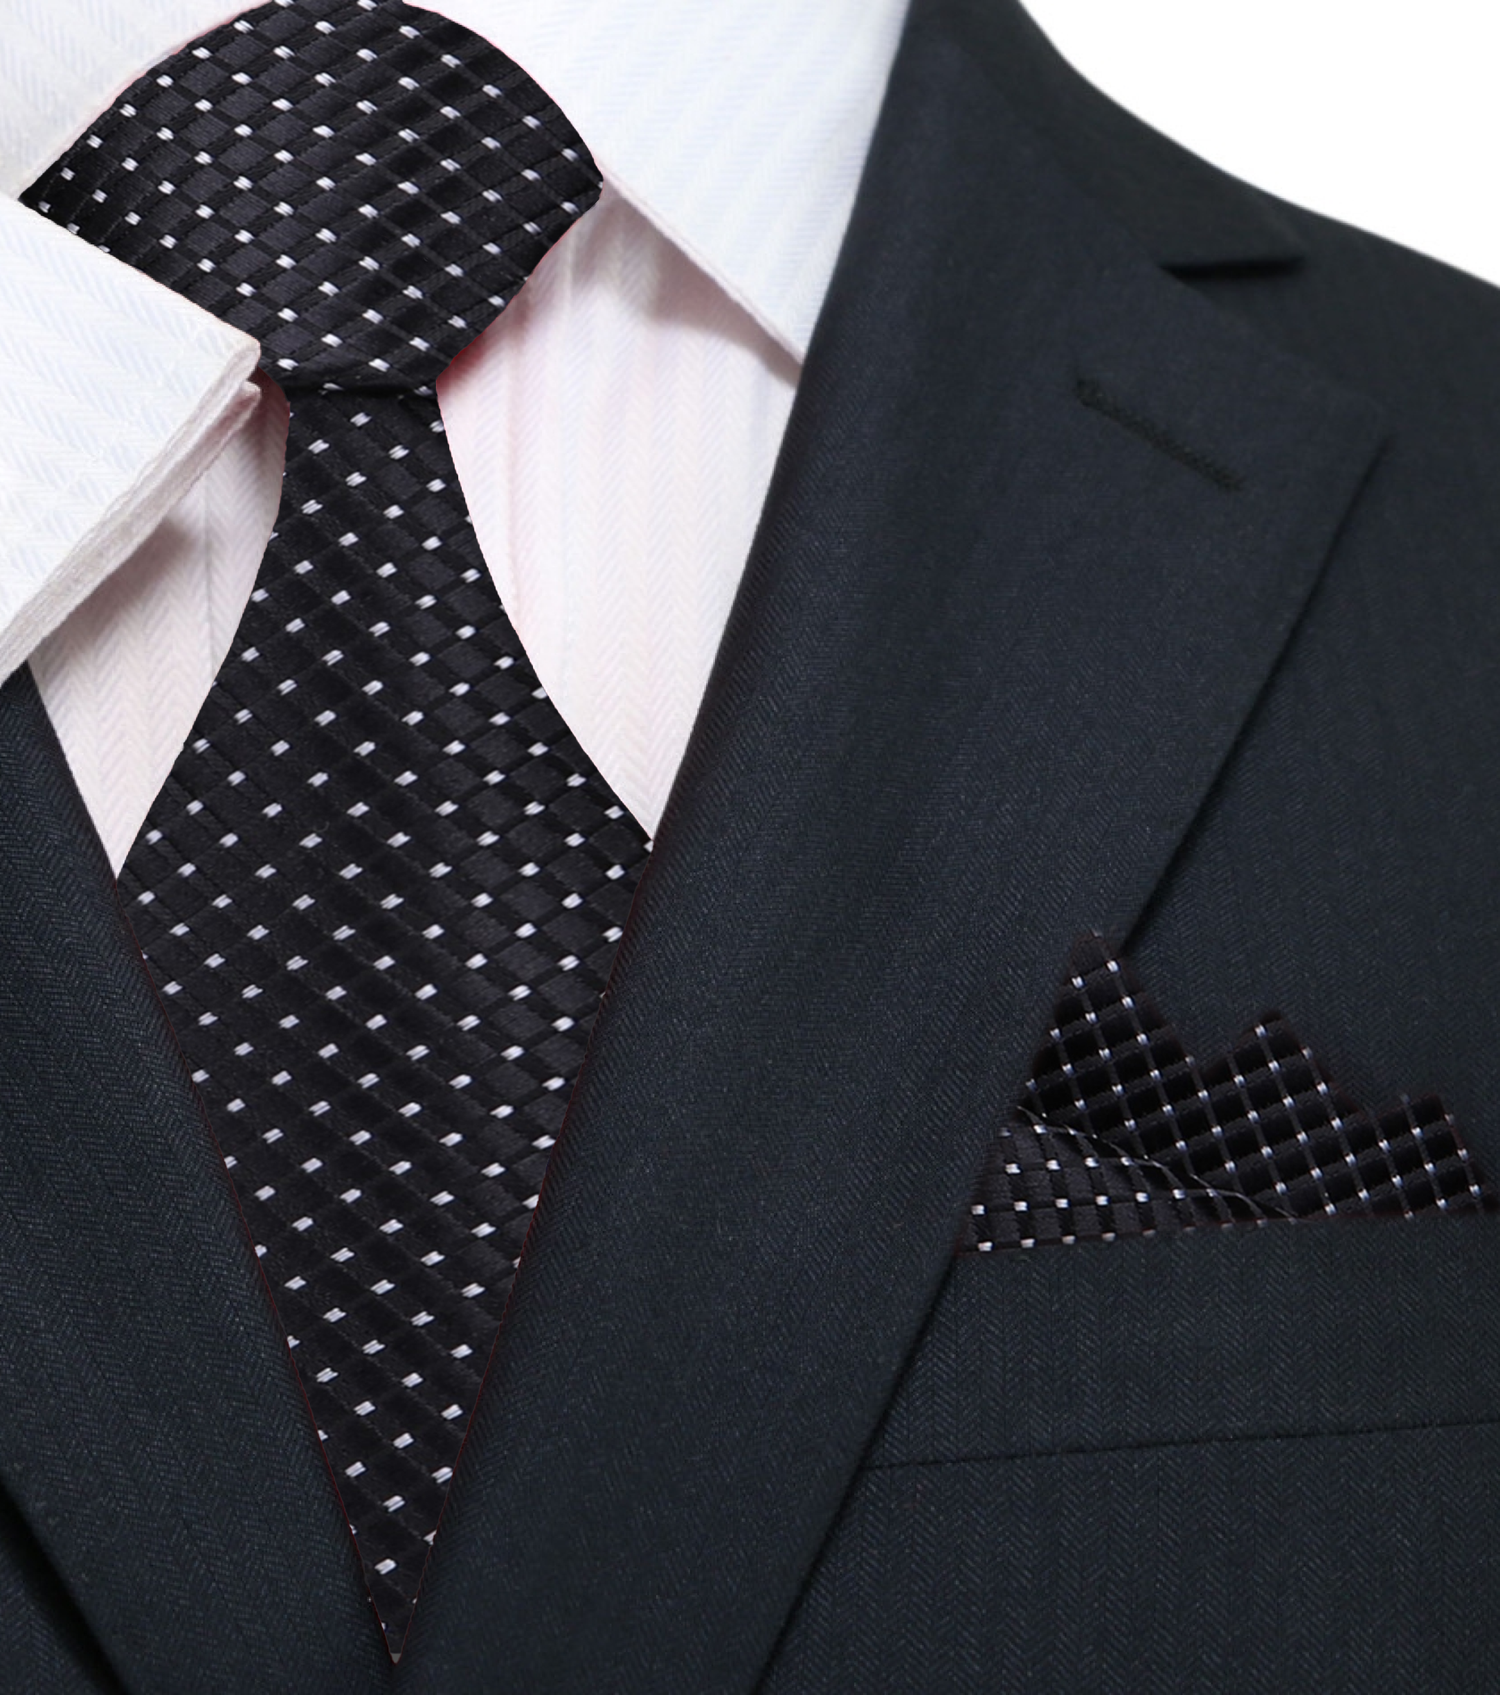 Main: A Black Small Geometric Diamond With Small Dots Pattern Silk Necktie With Pocket Square|